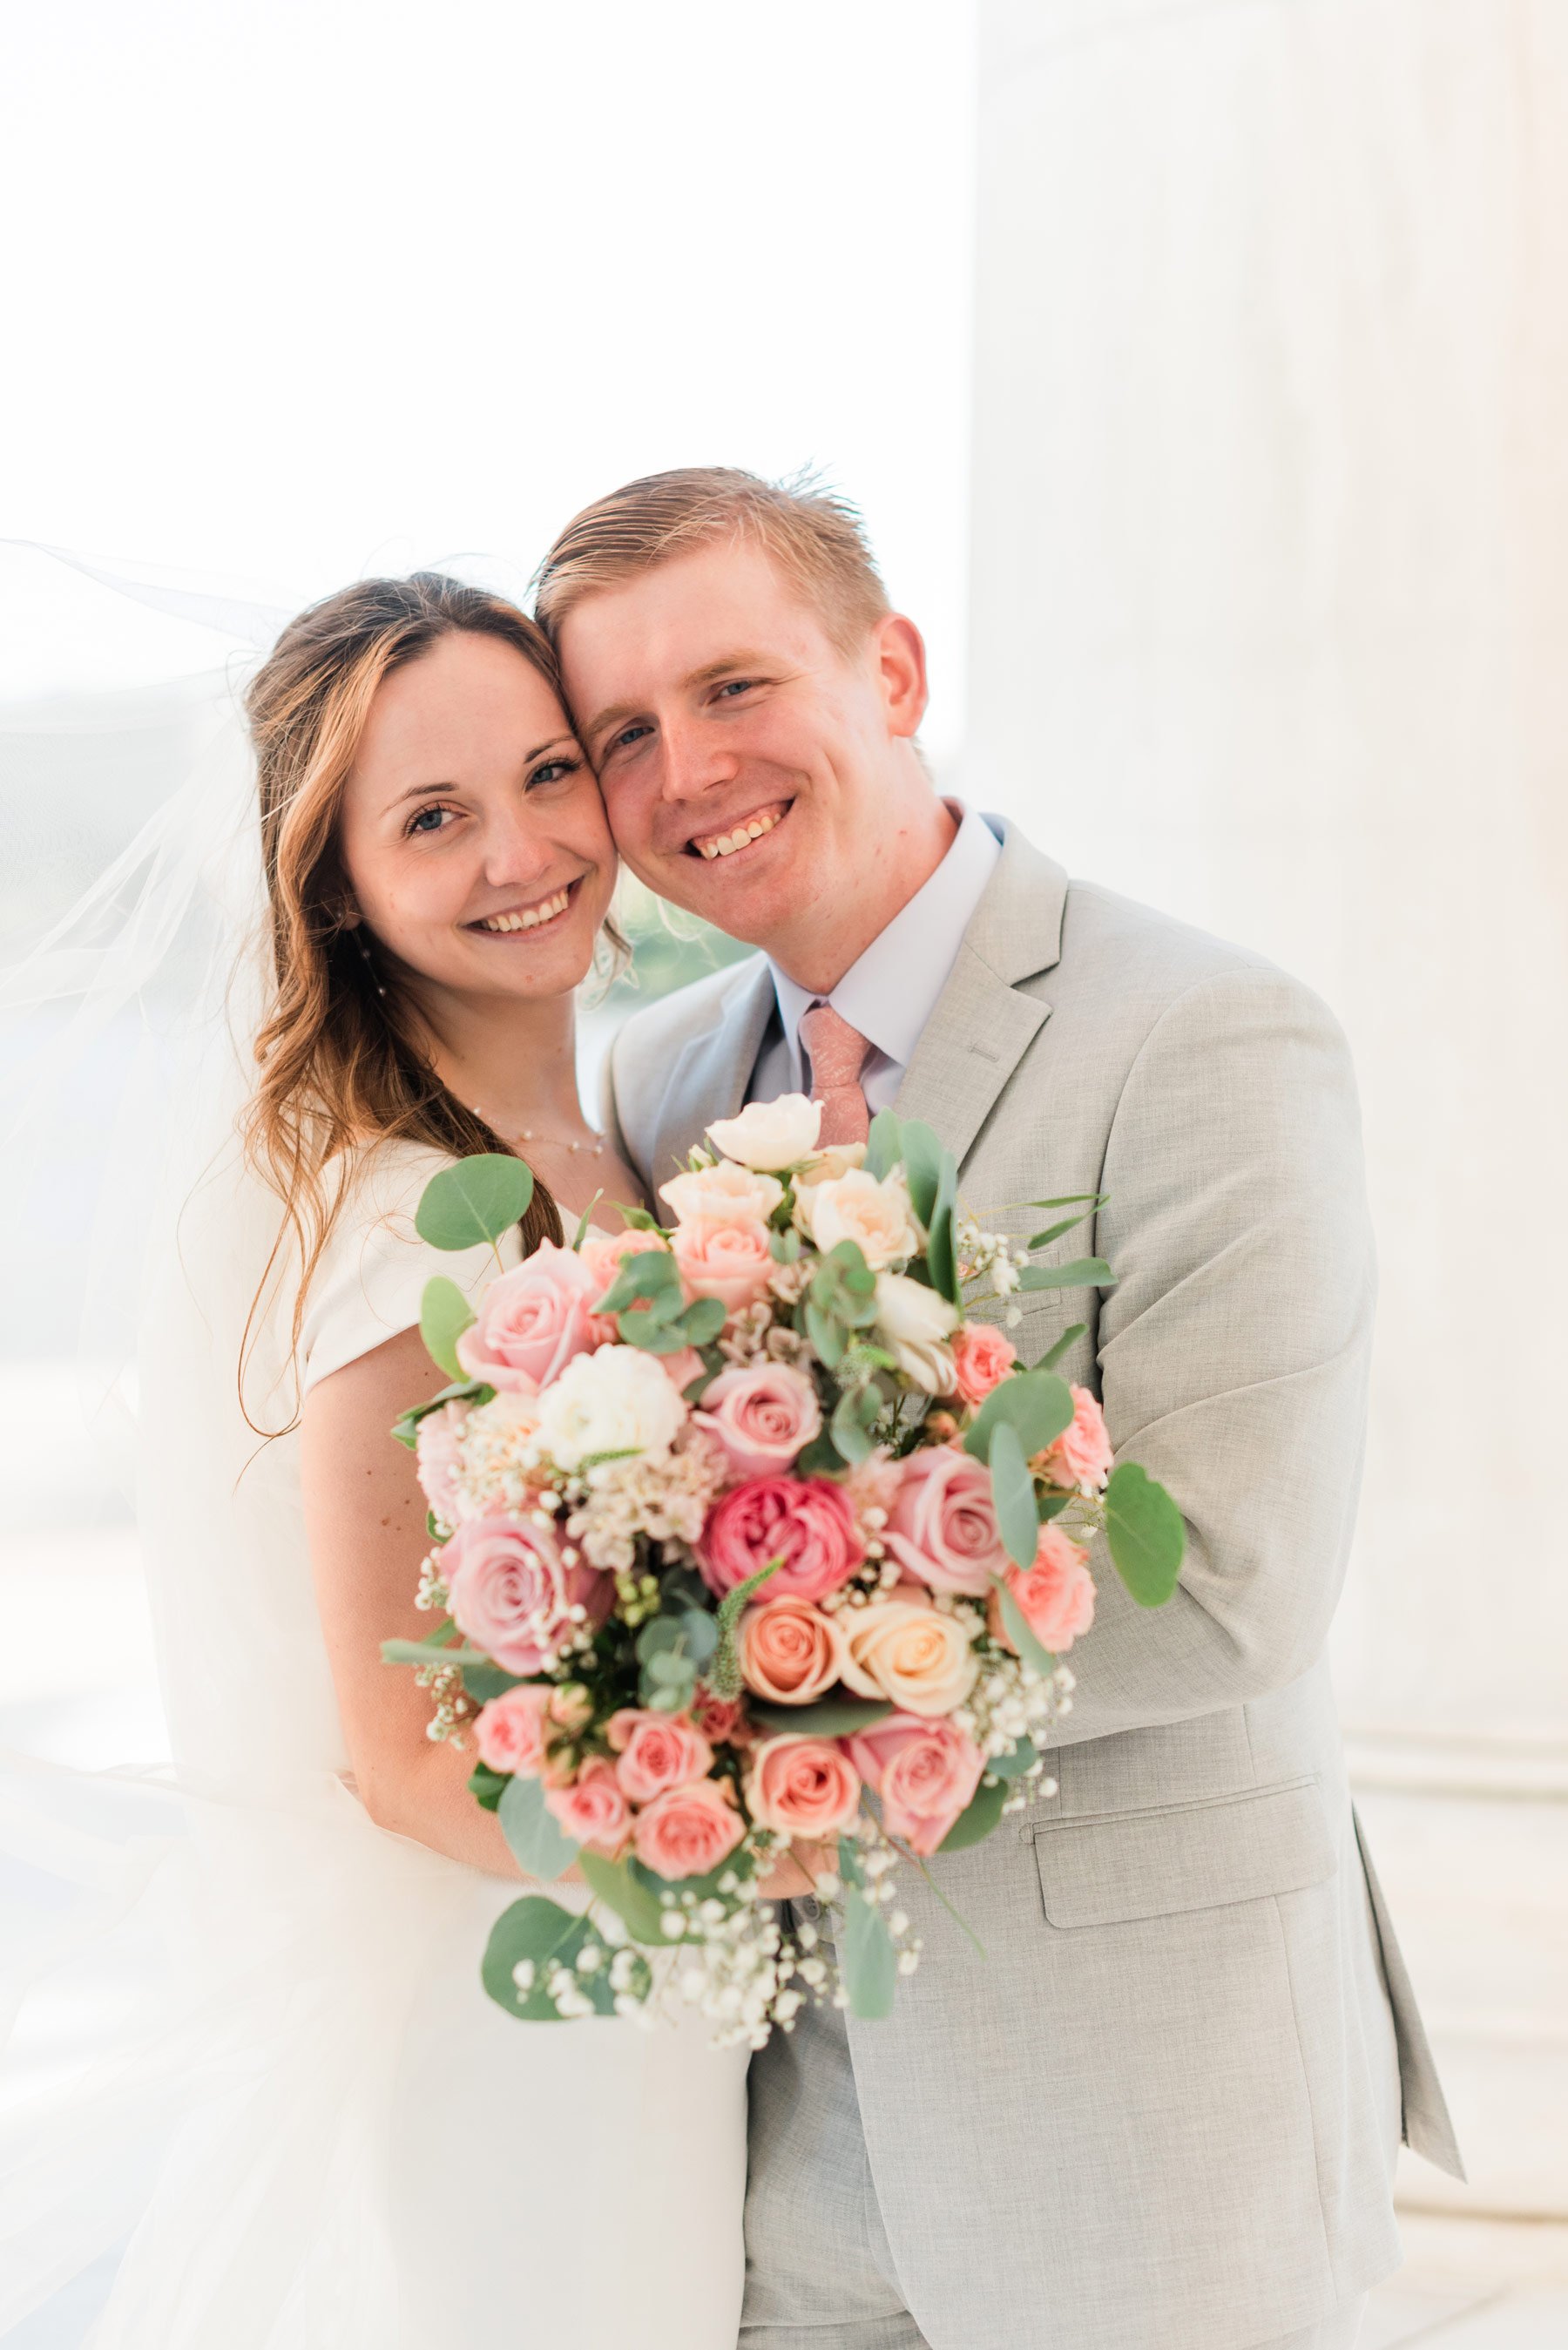    The bride’s bouquet is full of pink and white roses with a few sprigs of baby’s breath. #washingtondcphotography #washingtondctemple #washingtondcwedding #dcweddingphotographer #washingtondctemplewedding #eastcoastweddingphotographer #sunsetbridal